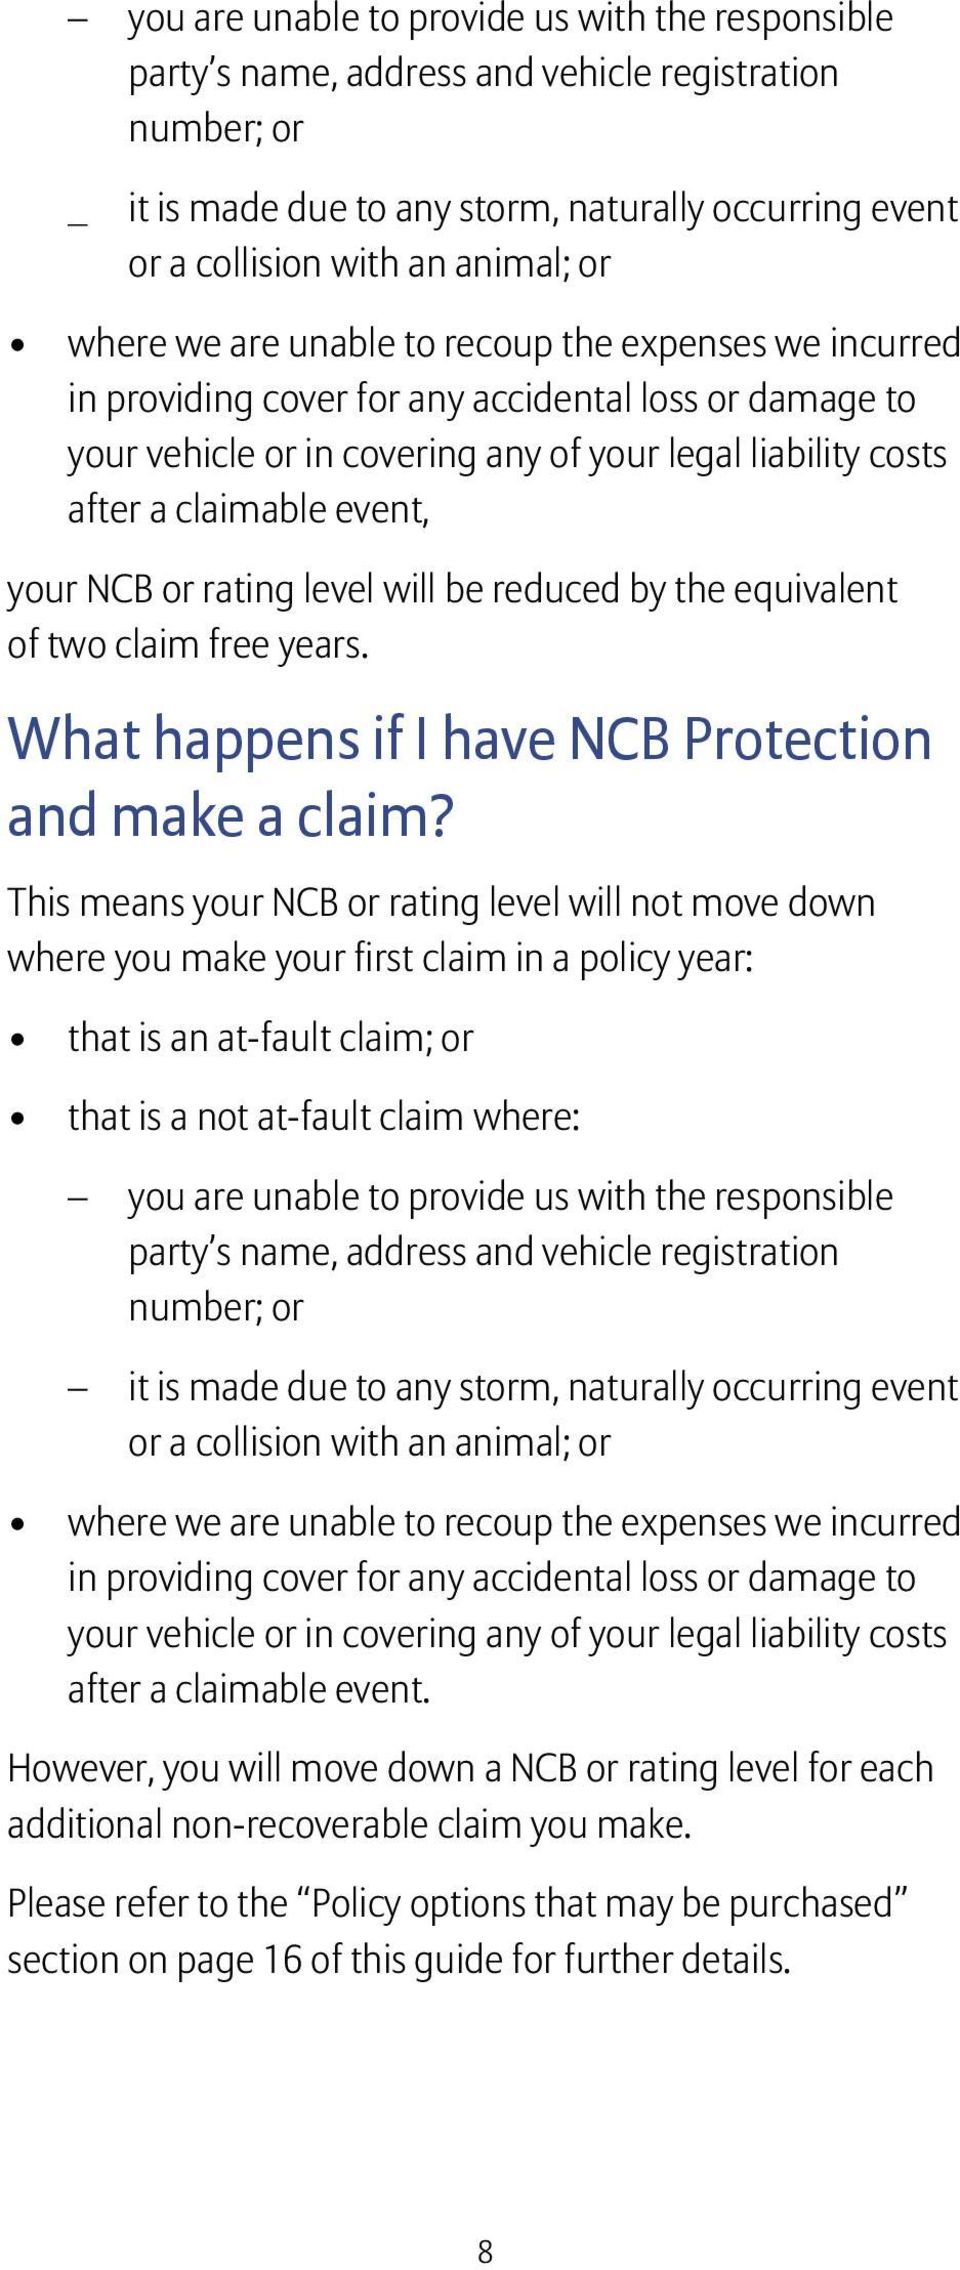 your NCB or rating level will be reduced by the equivalent of two claim free years. What happens if I have NCB Protection and make a claim?